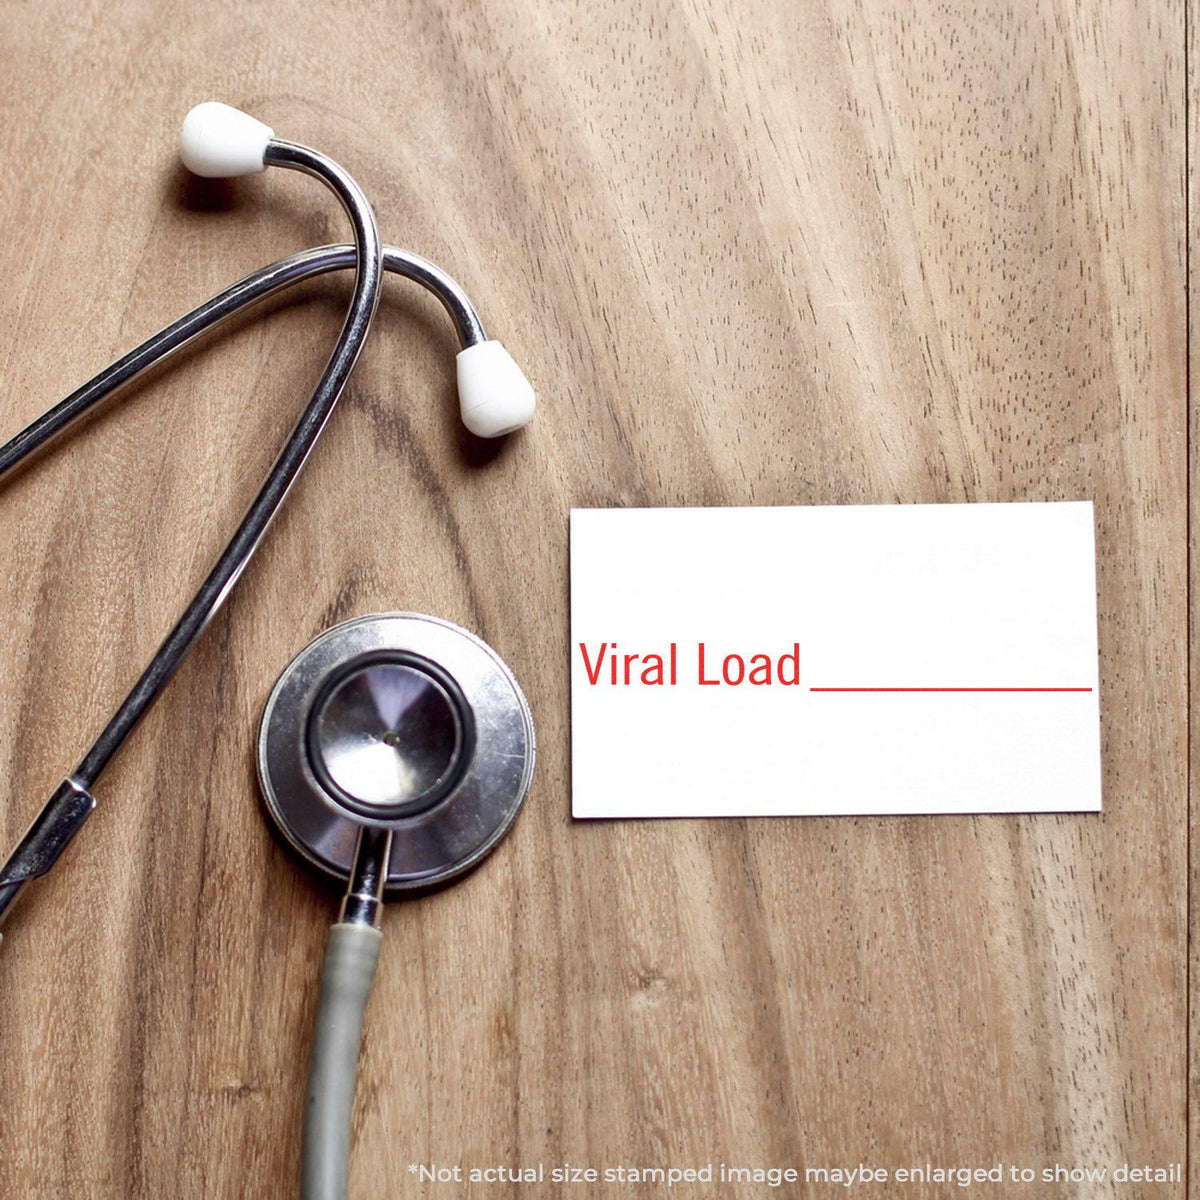 In Use Large Pre-Inked Viral Load Stamp Image